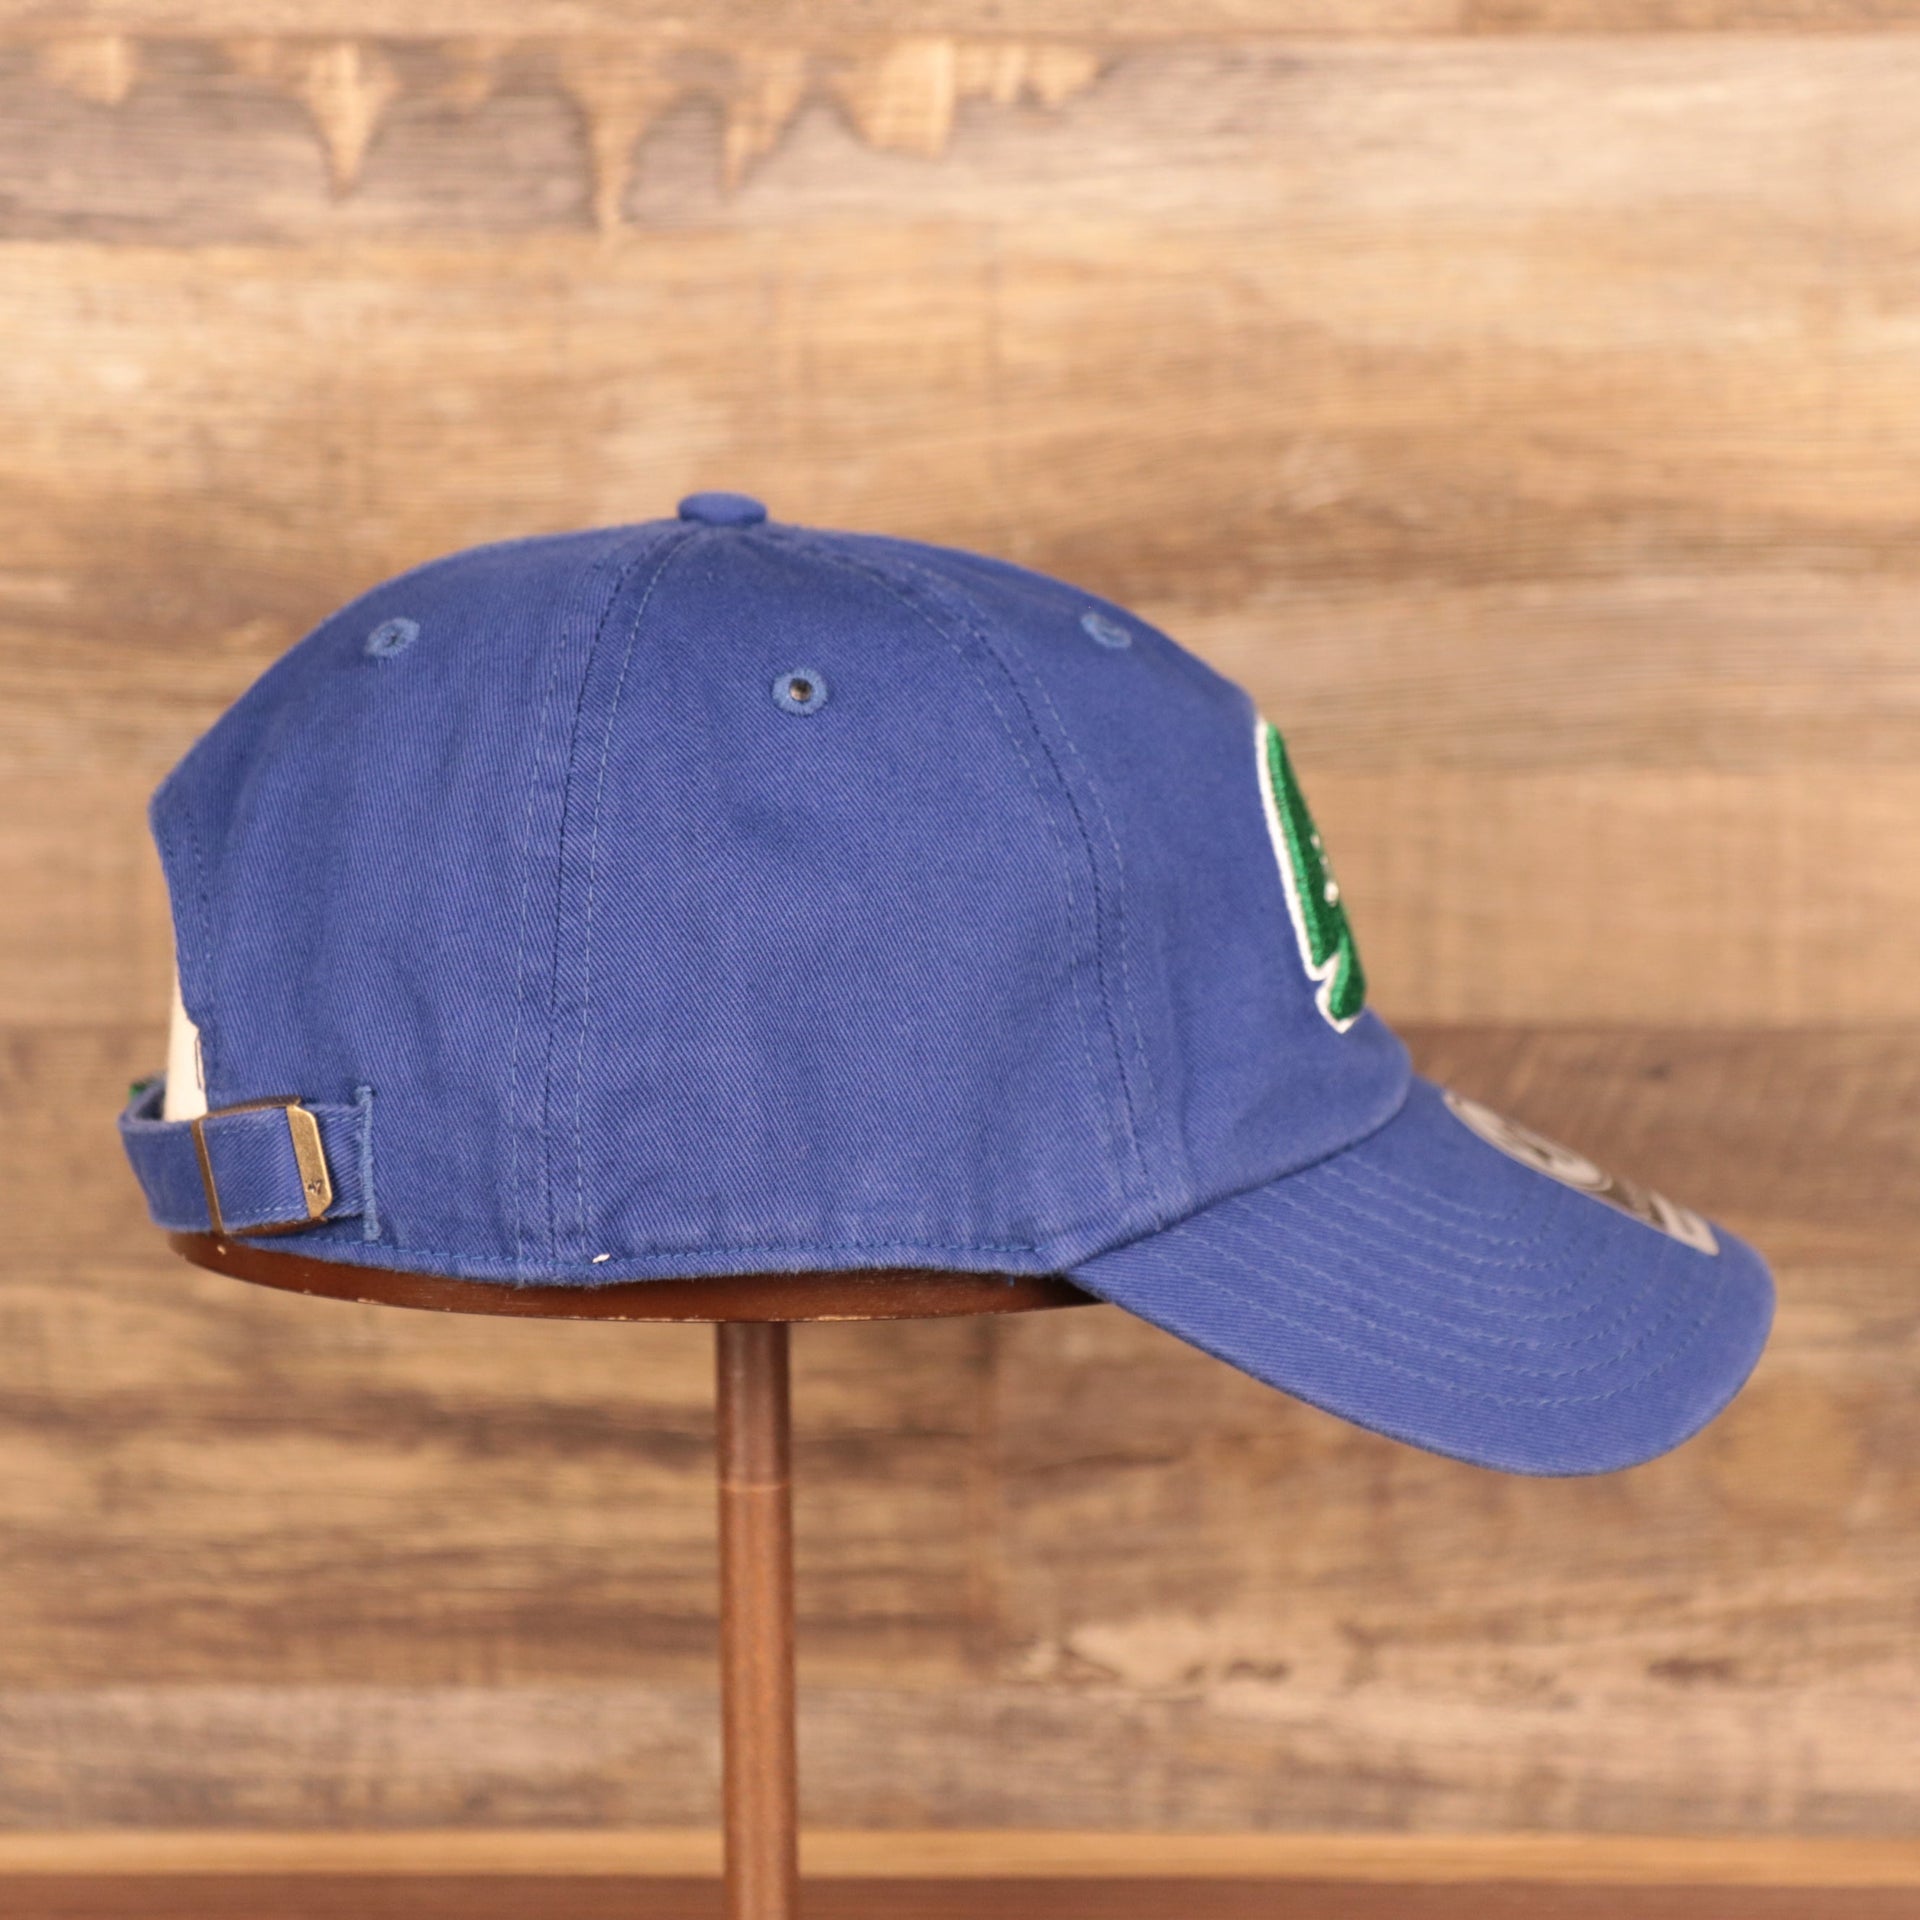 wearers right side Hartford Whalers Throwback Royal Adjustable Dad Hat